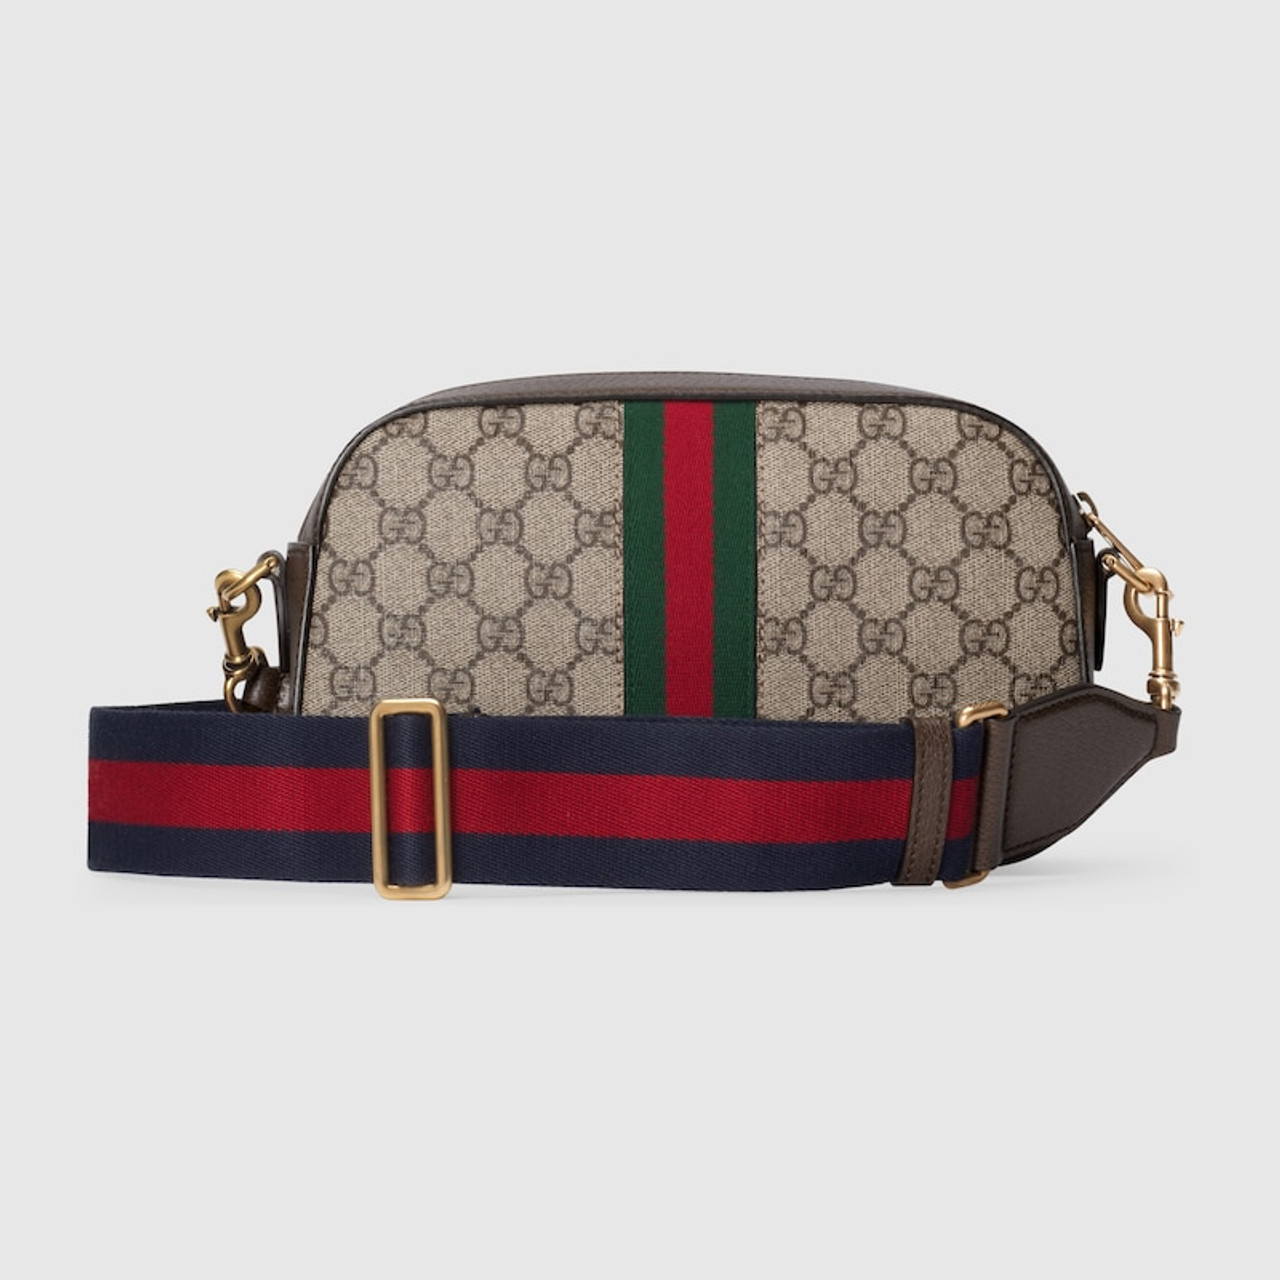 Gucci Ophidia Small Handbag in Brown